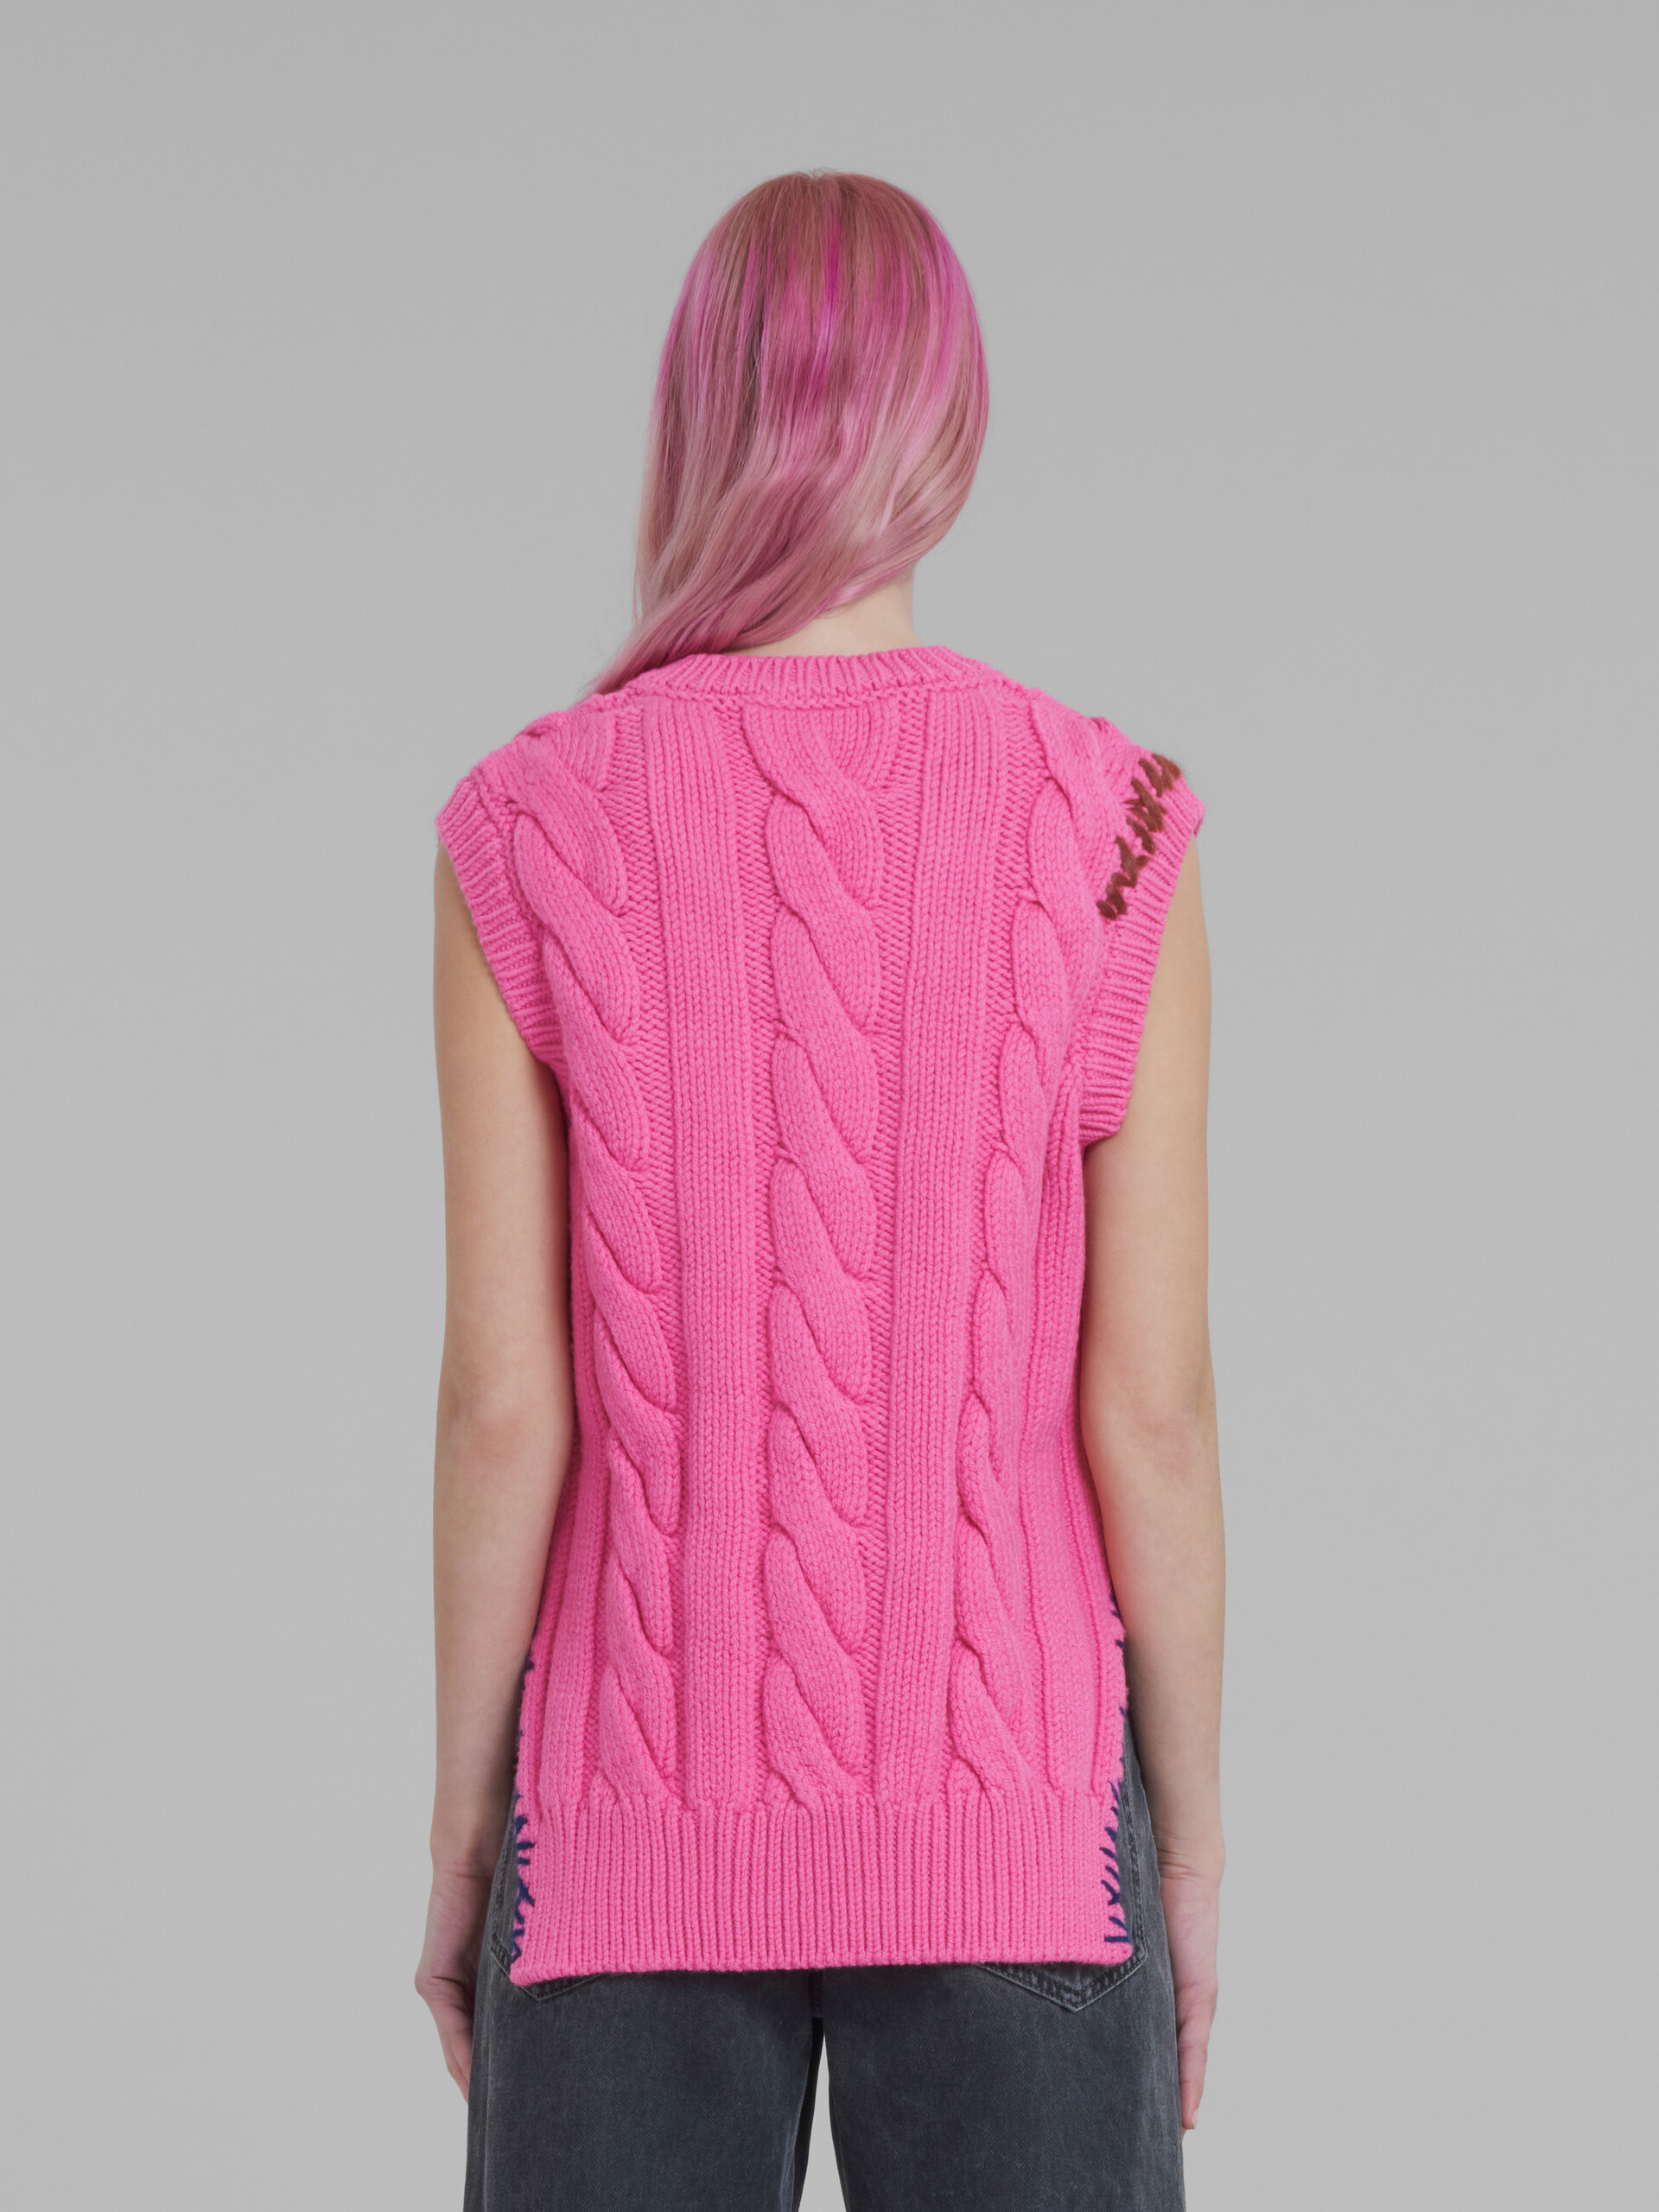 Fuchsia cable-knit vest - Pullovers - Image 3